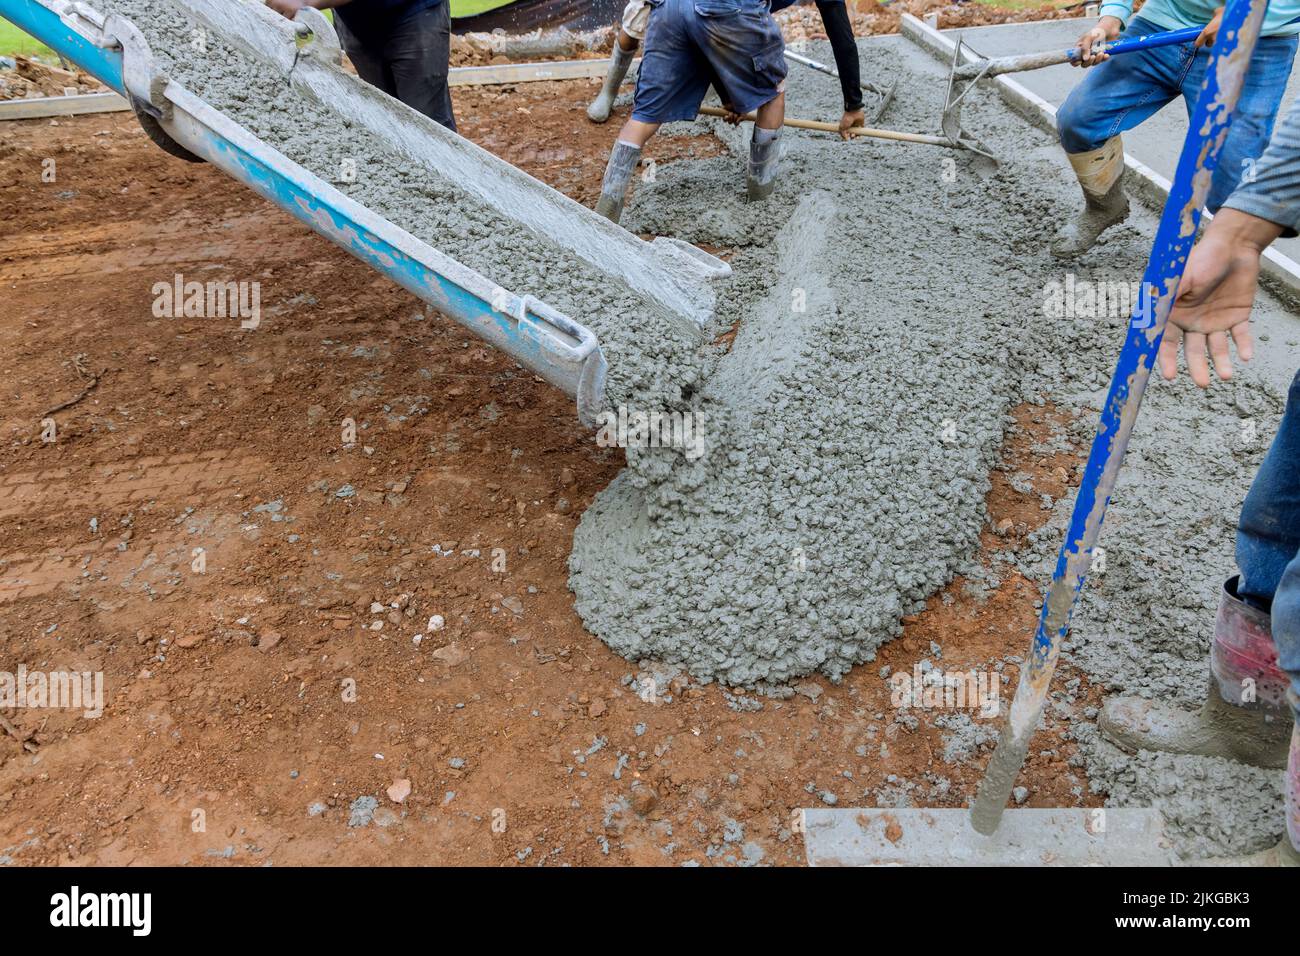 Assisting with the pouring of cement onto a new concrete driveway for an apartment building Stock Photo